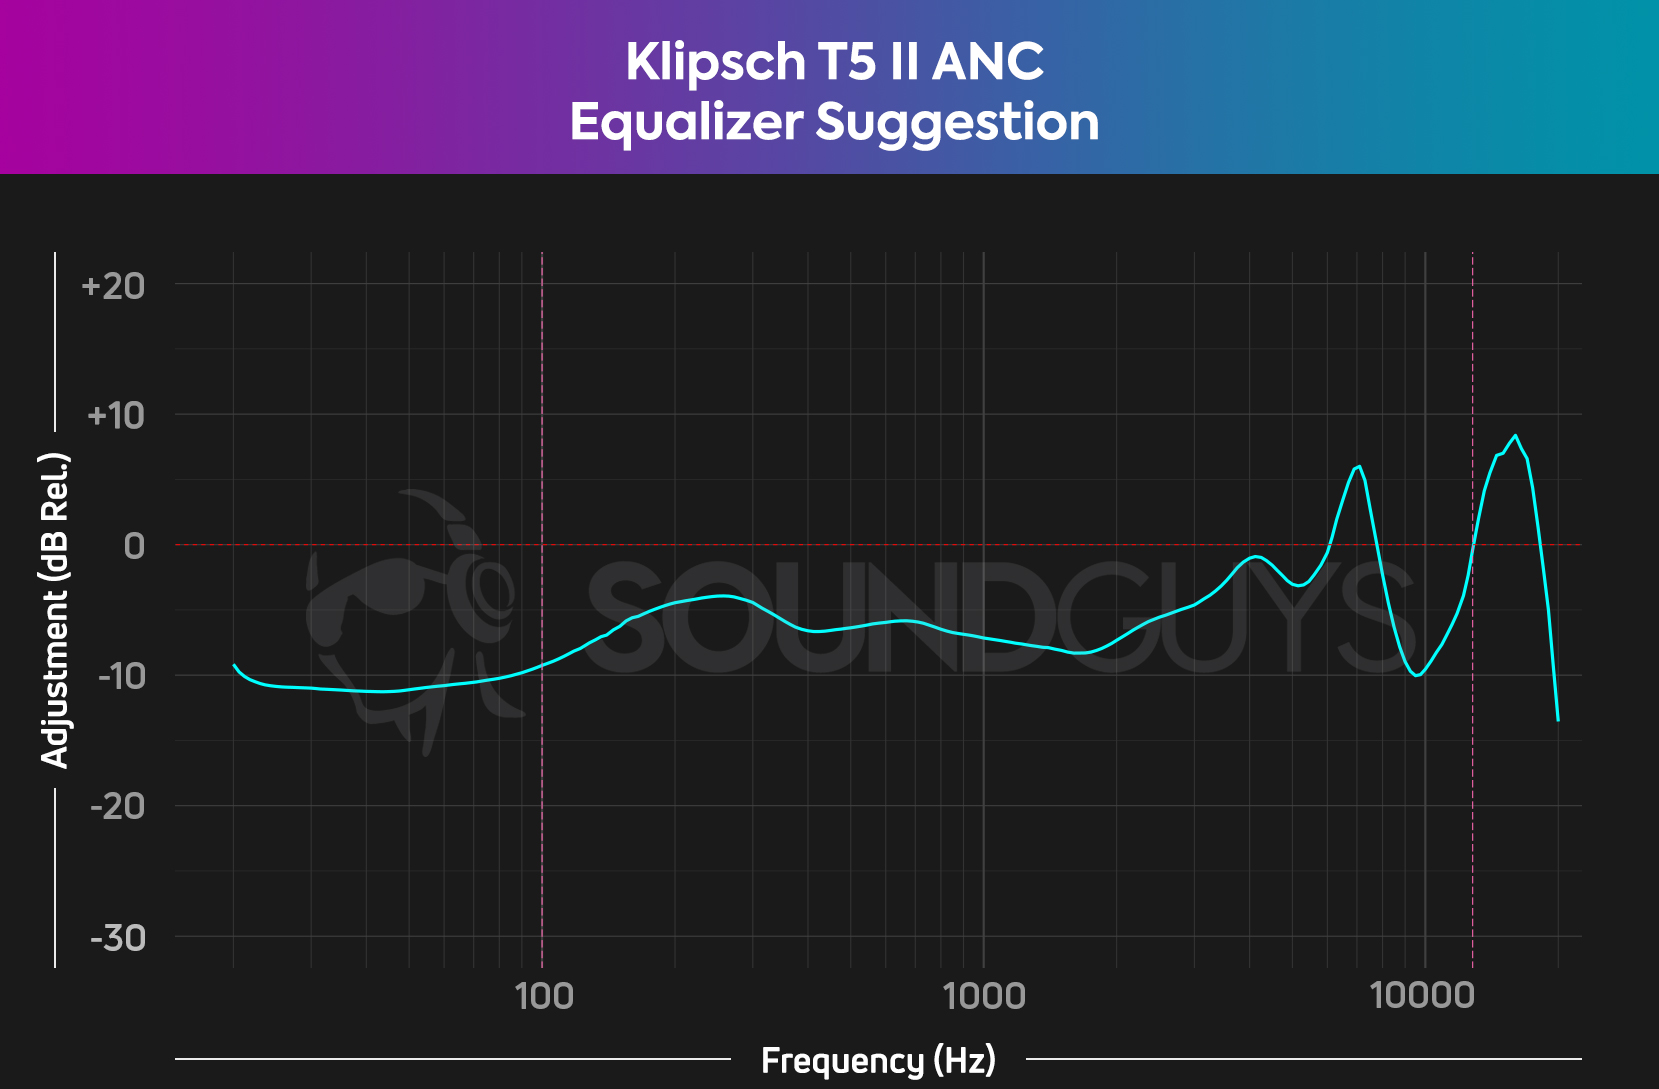 Chart displays a suggested EQ setting to improve the Klipsch T5 II ANC sound.